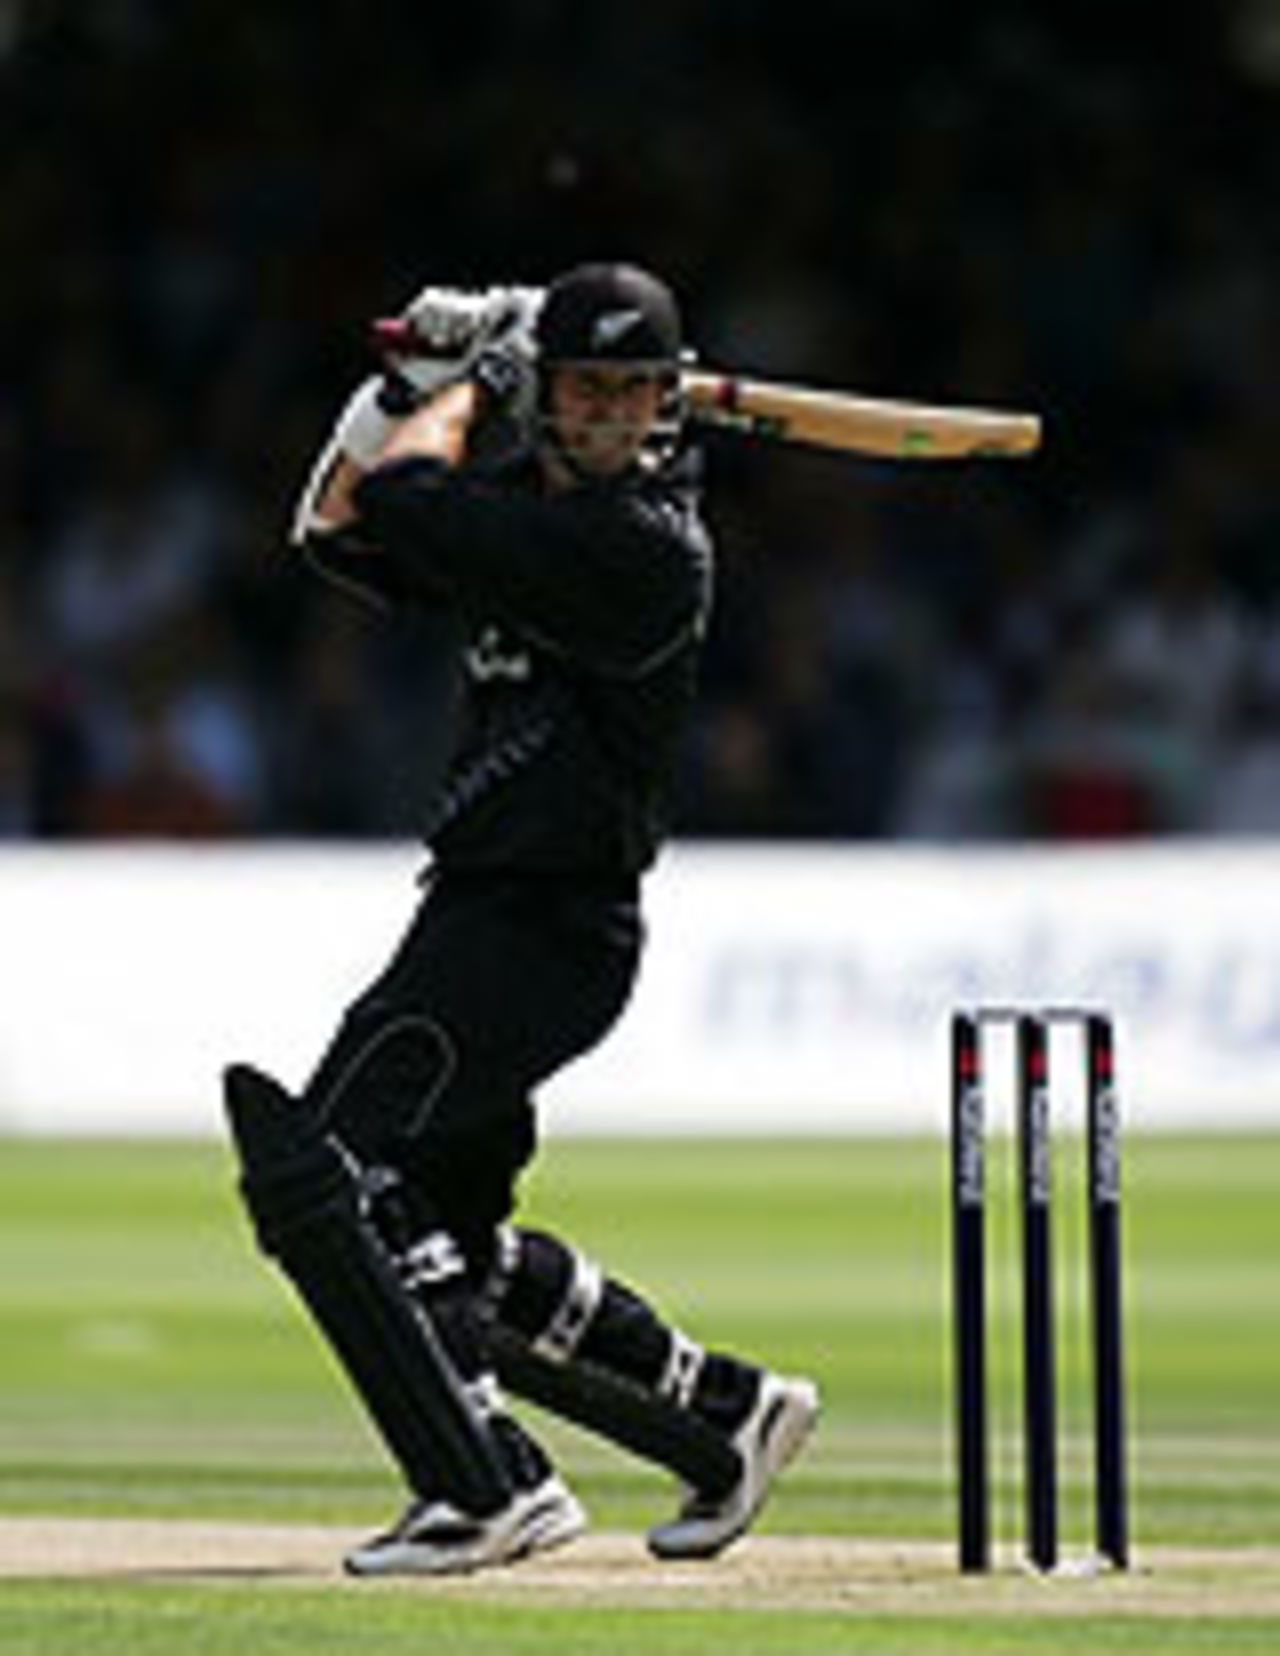 Stephen Fleming drives, New Zealand v West Indies, Lord's, July 10, 2004